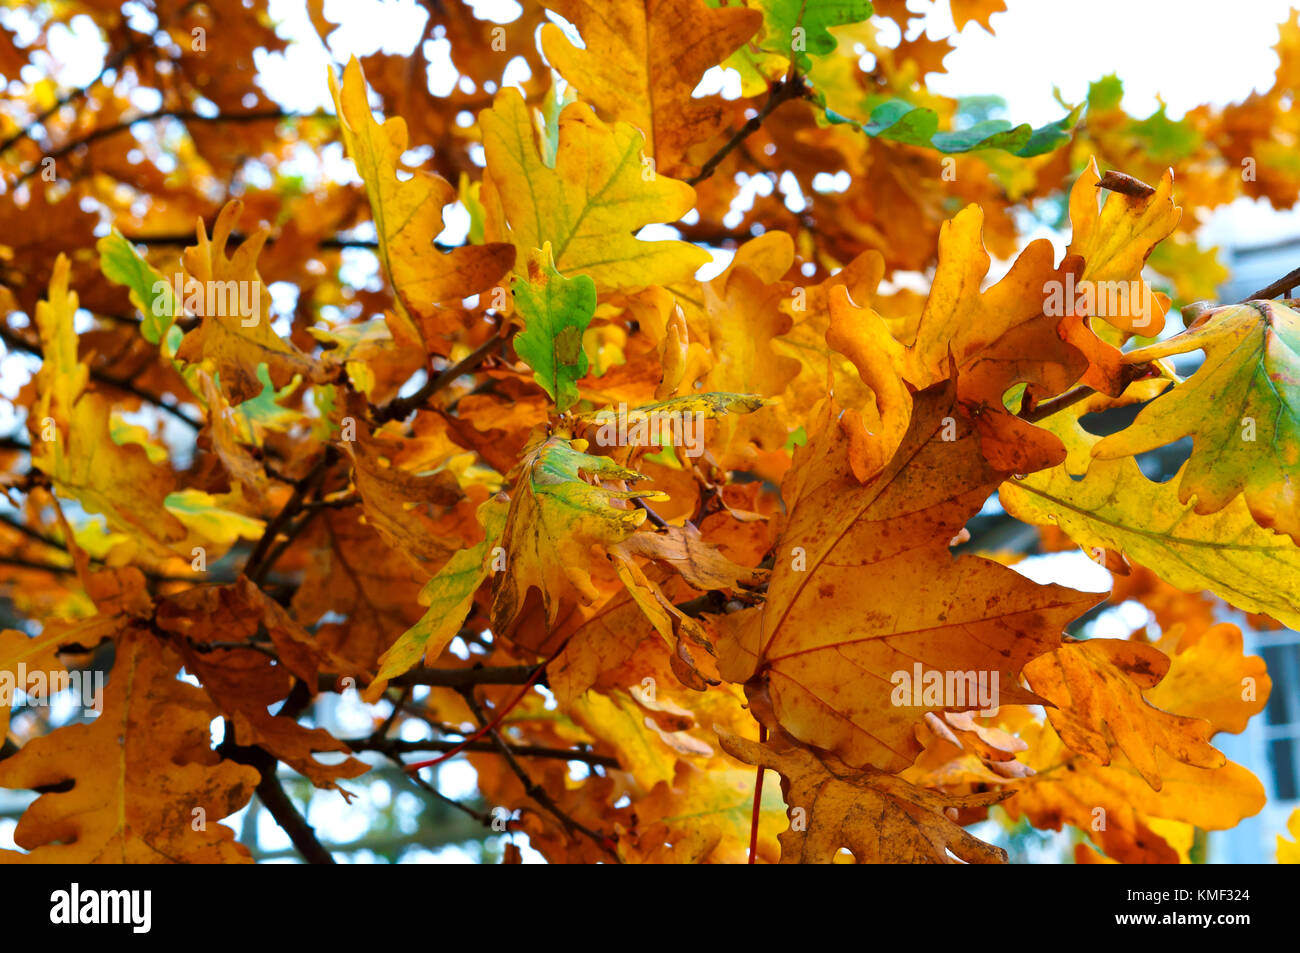 yellowed and reddened leaves of trees in autumn, autumn yellow leaves Stock Photo